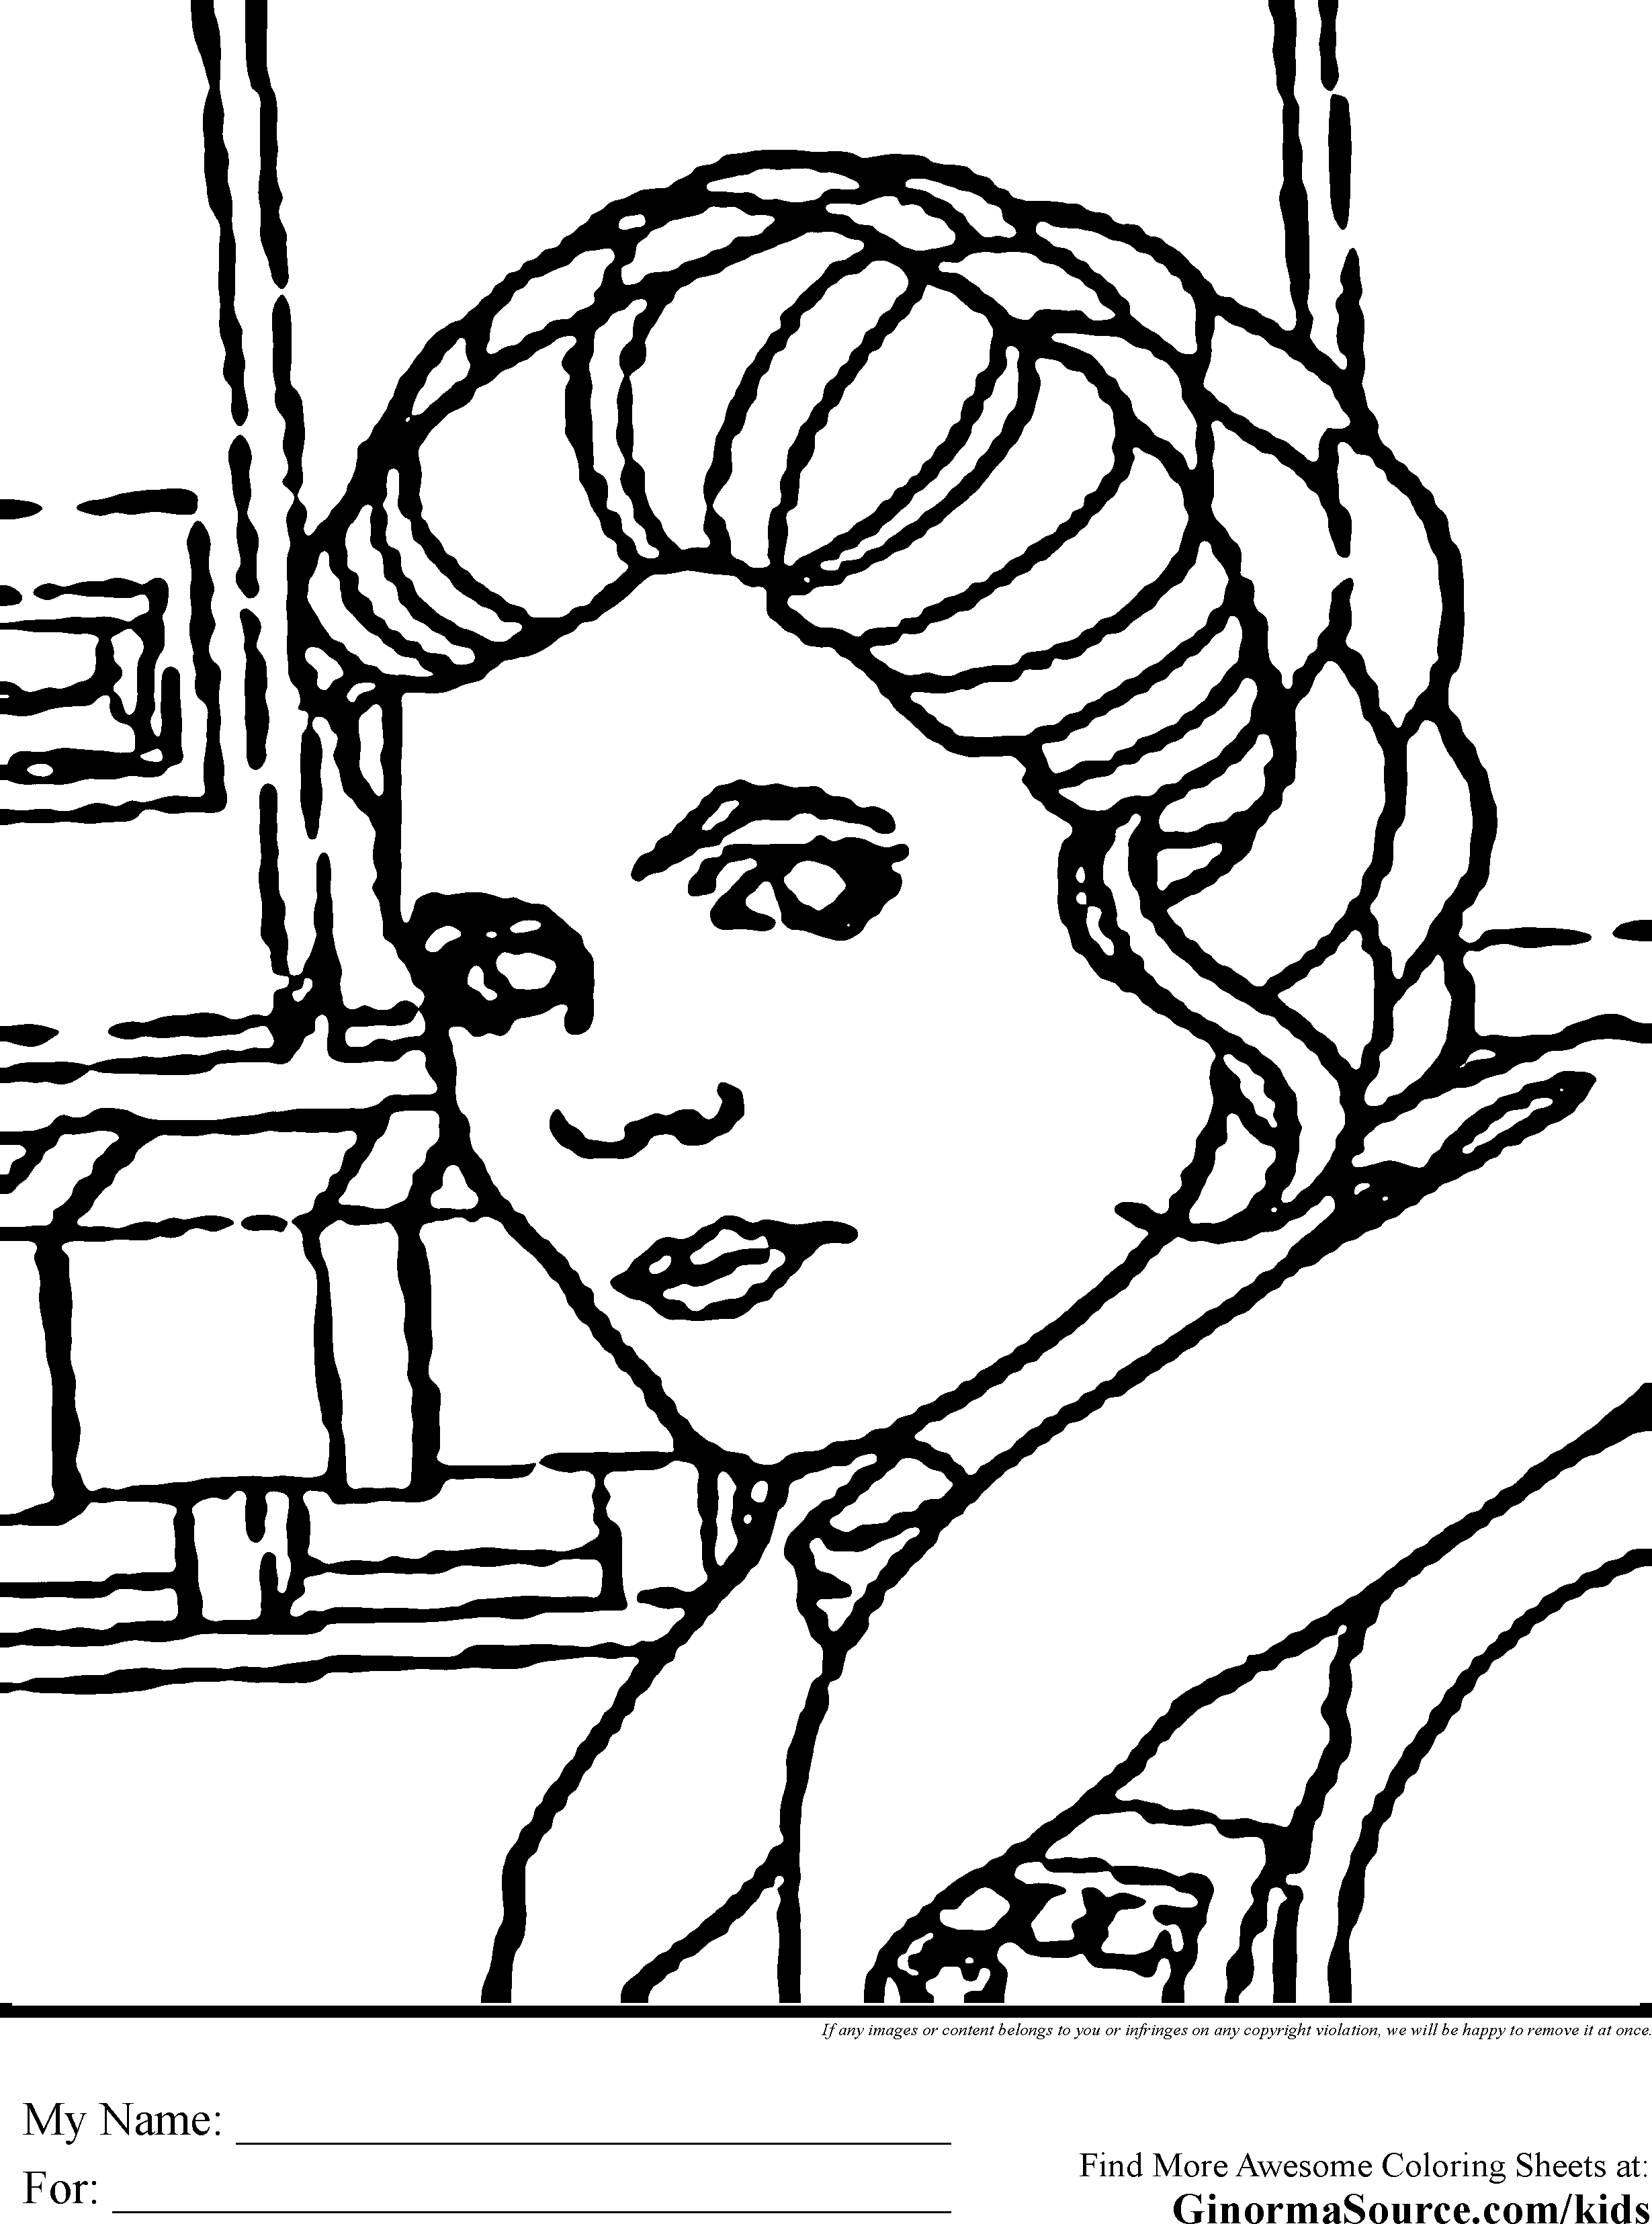 8 Pics of Star Wars Princess Padme Or Leia Coloring Pages ...